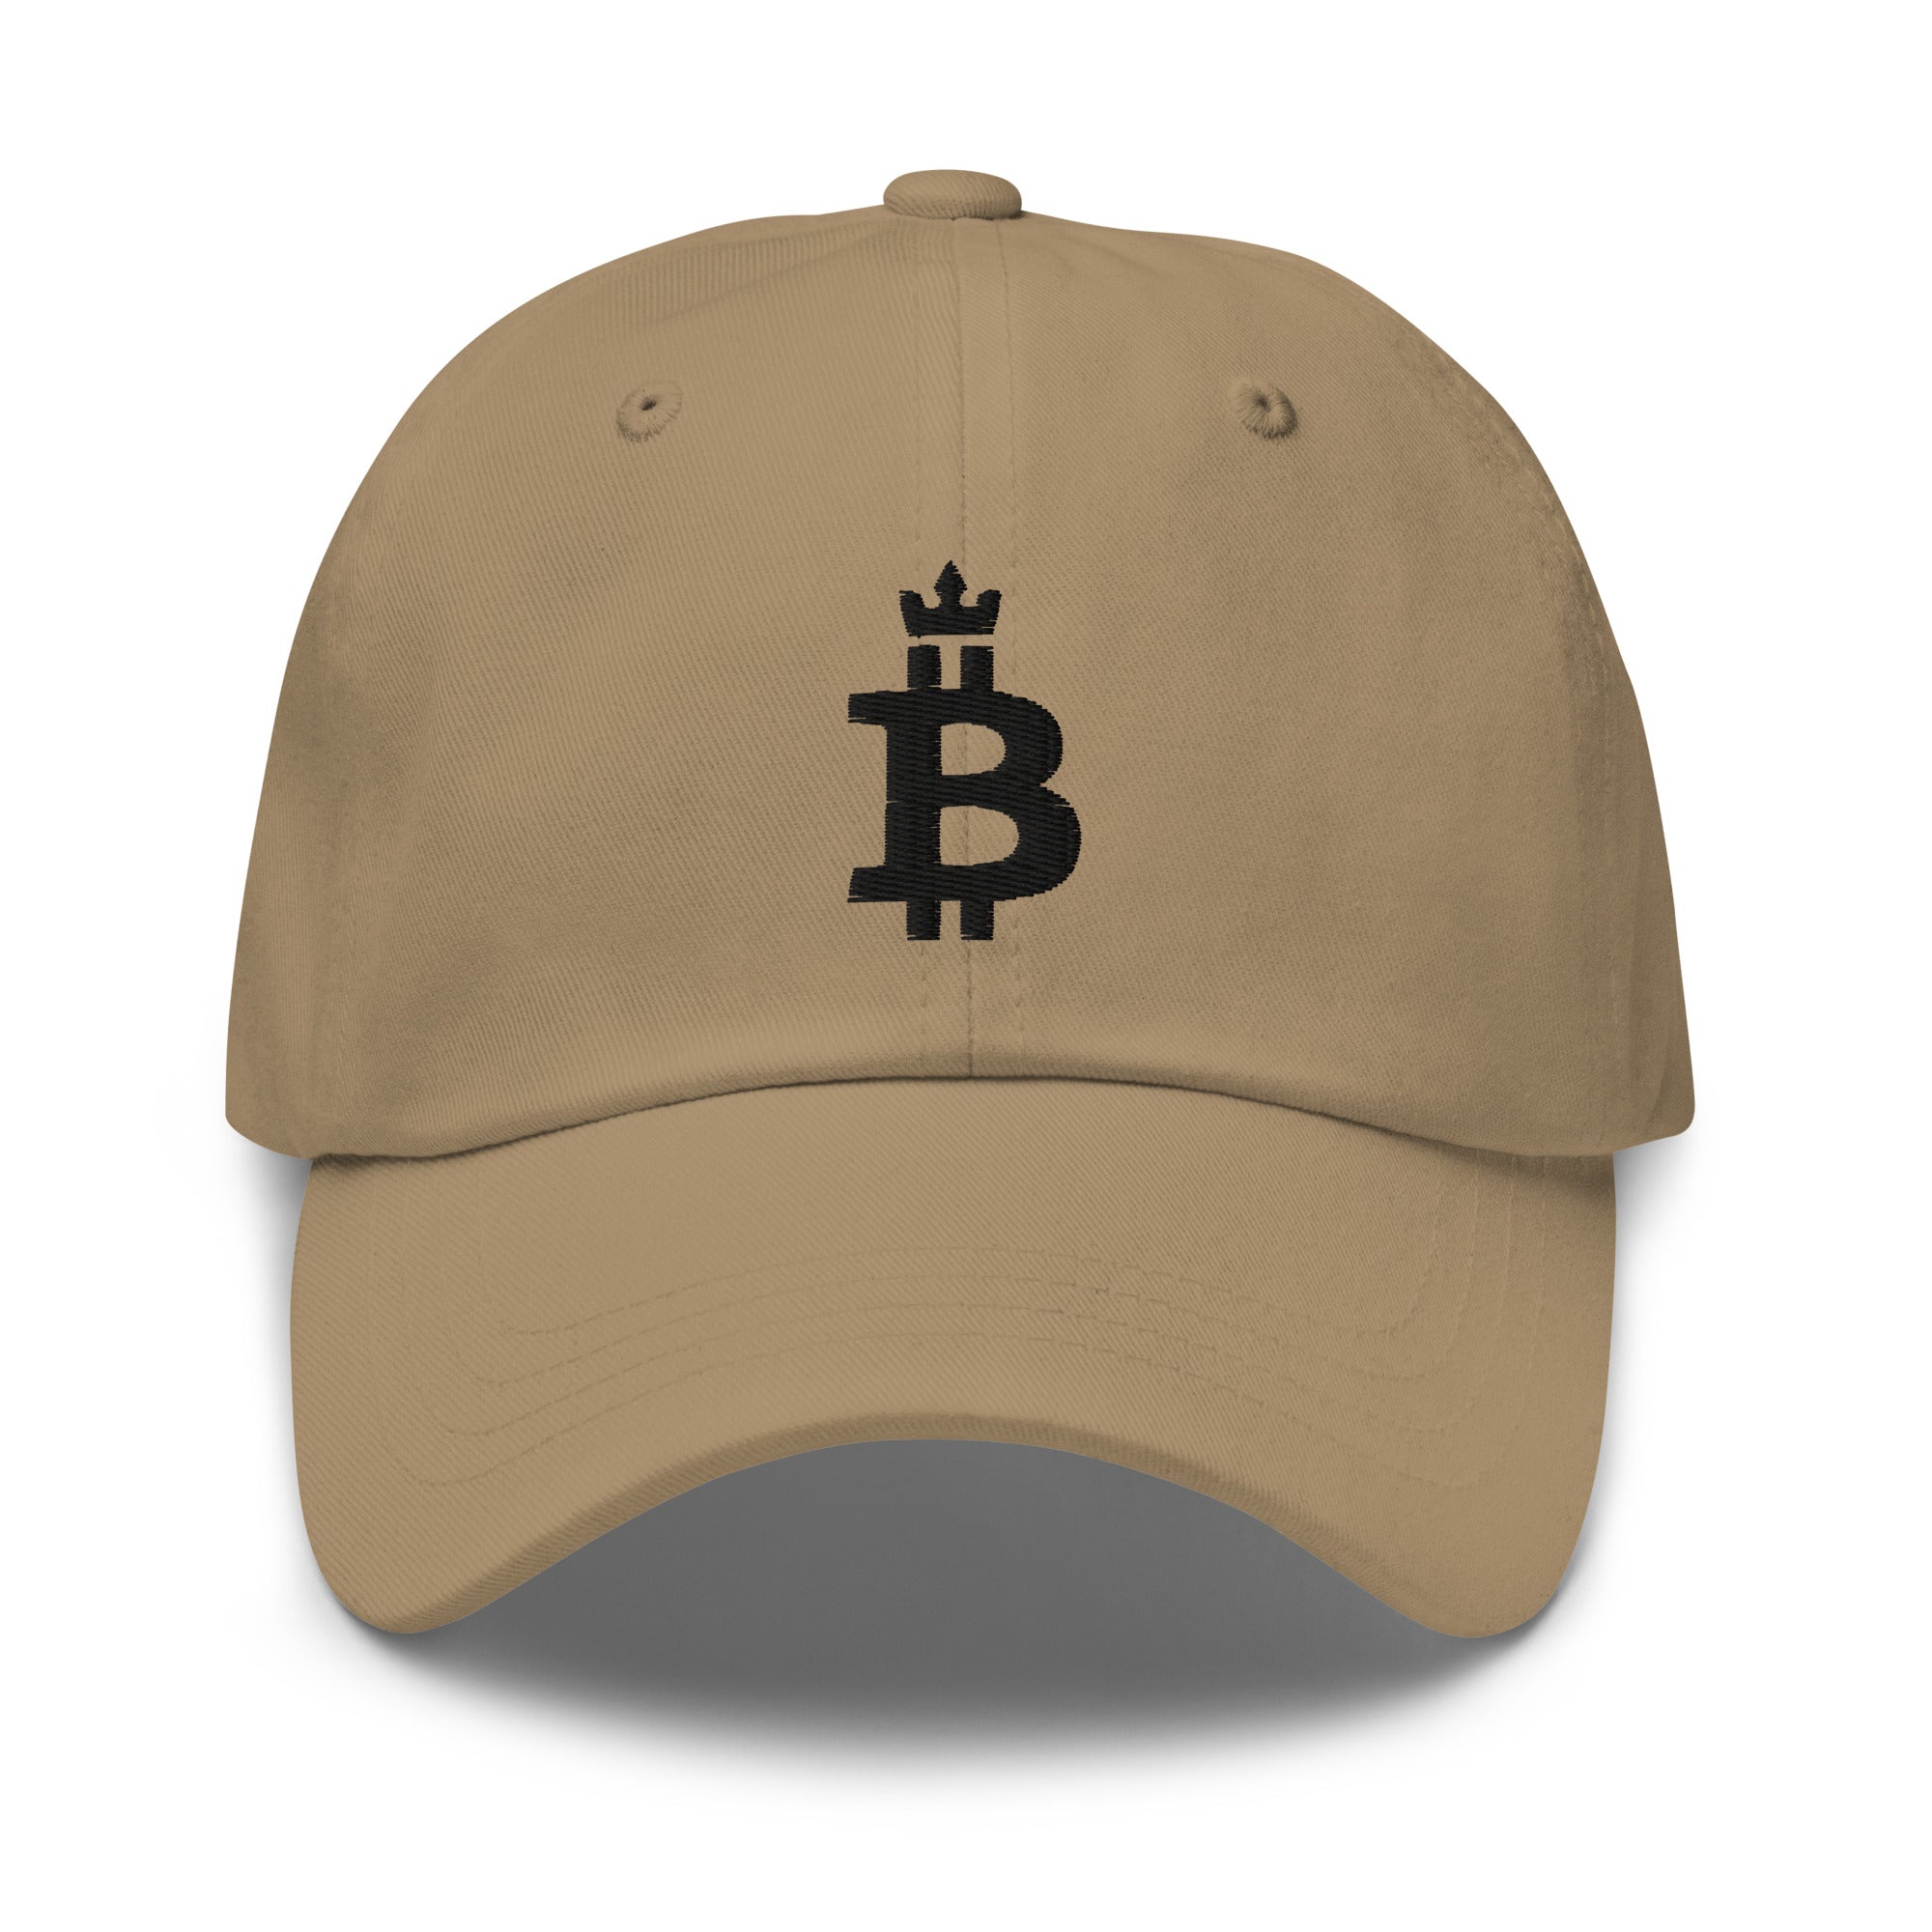 Bitcoin Merch - This Bitcoin Dominance Hat features an embroidered Bitcoin design on the front of a khaki cap. Front view.